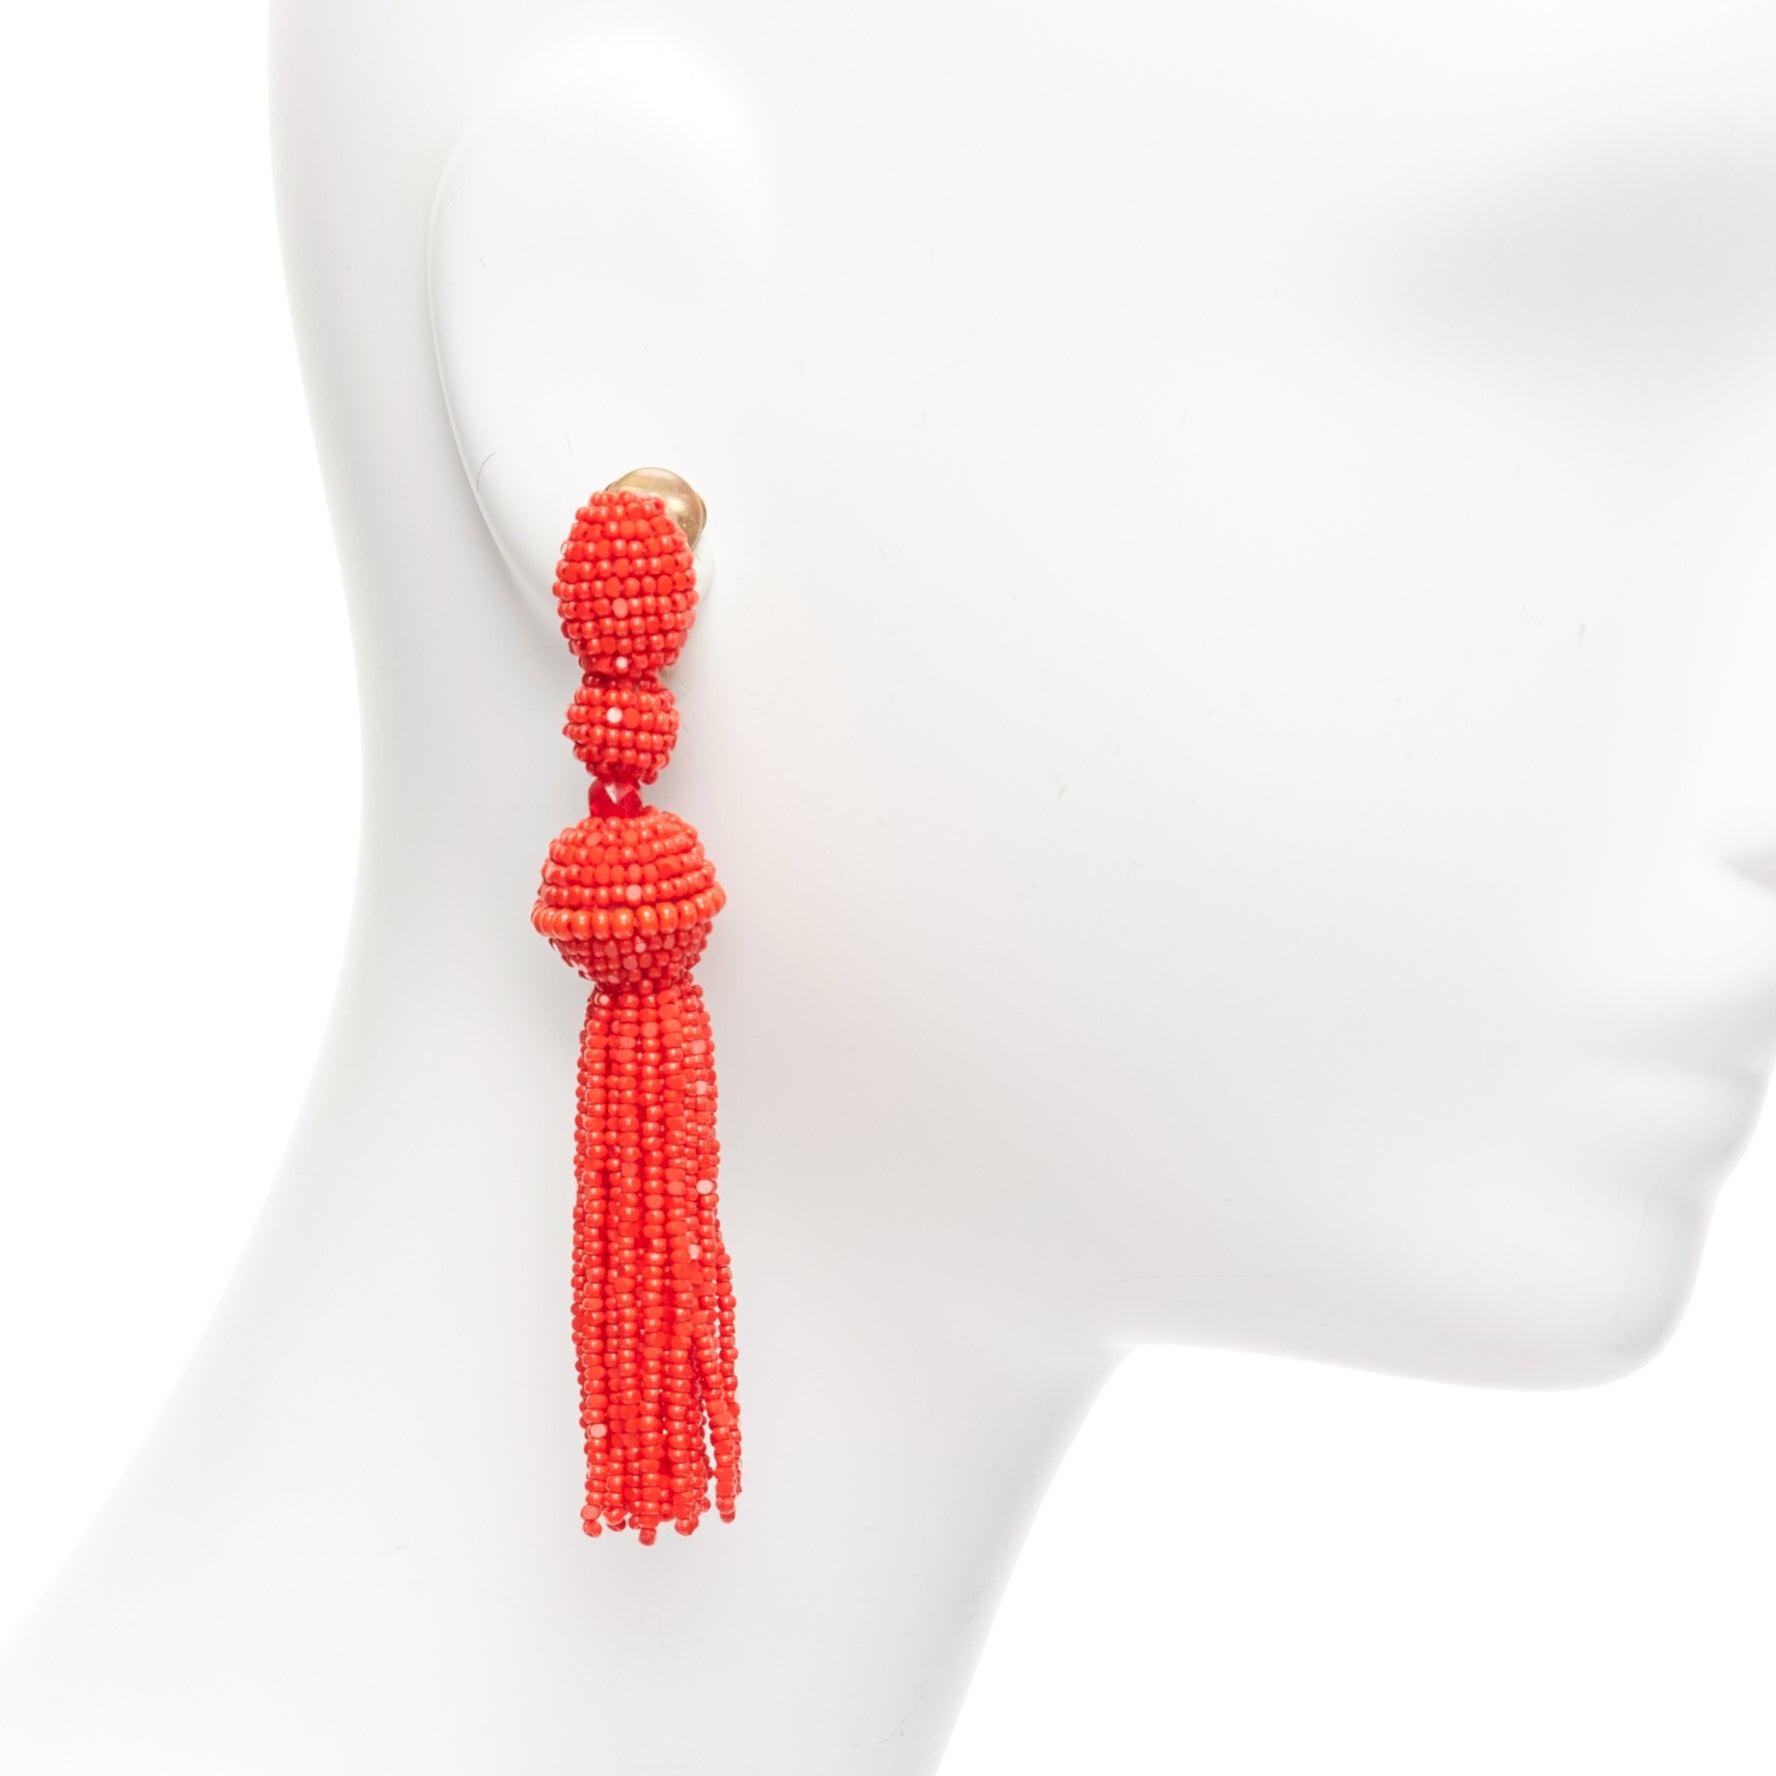 OSCAR DE LA RENTA red beaded tassel dangling chandelier clip on earrings pair
Reference: AAWC/A01051
Brand: Oscar de la Renta
Material: Acrylic
Color: Red, Gold
Pattern: Solid
Closure: Clip On
Lining: Gold Metal
Made in: India

CONDITION:
Condition: